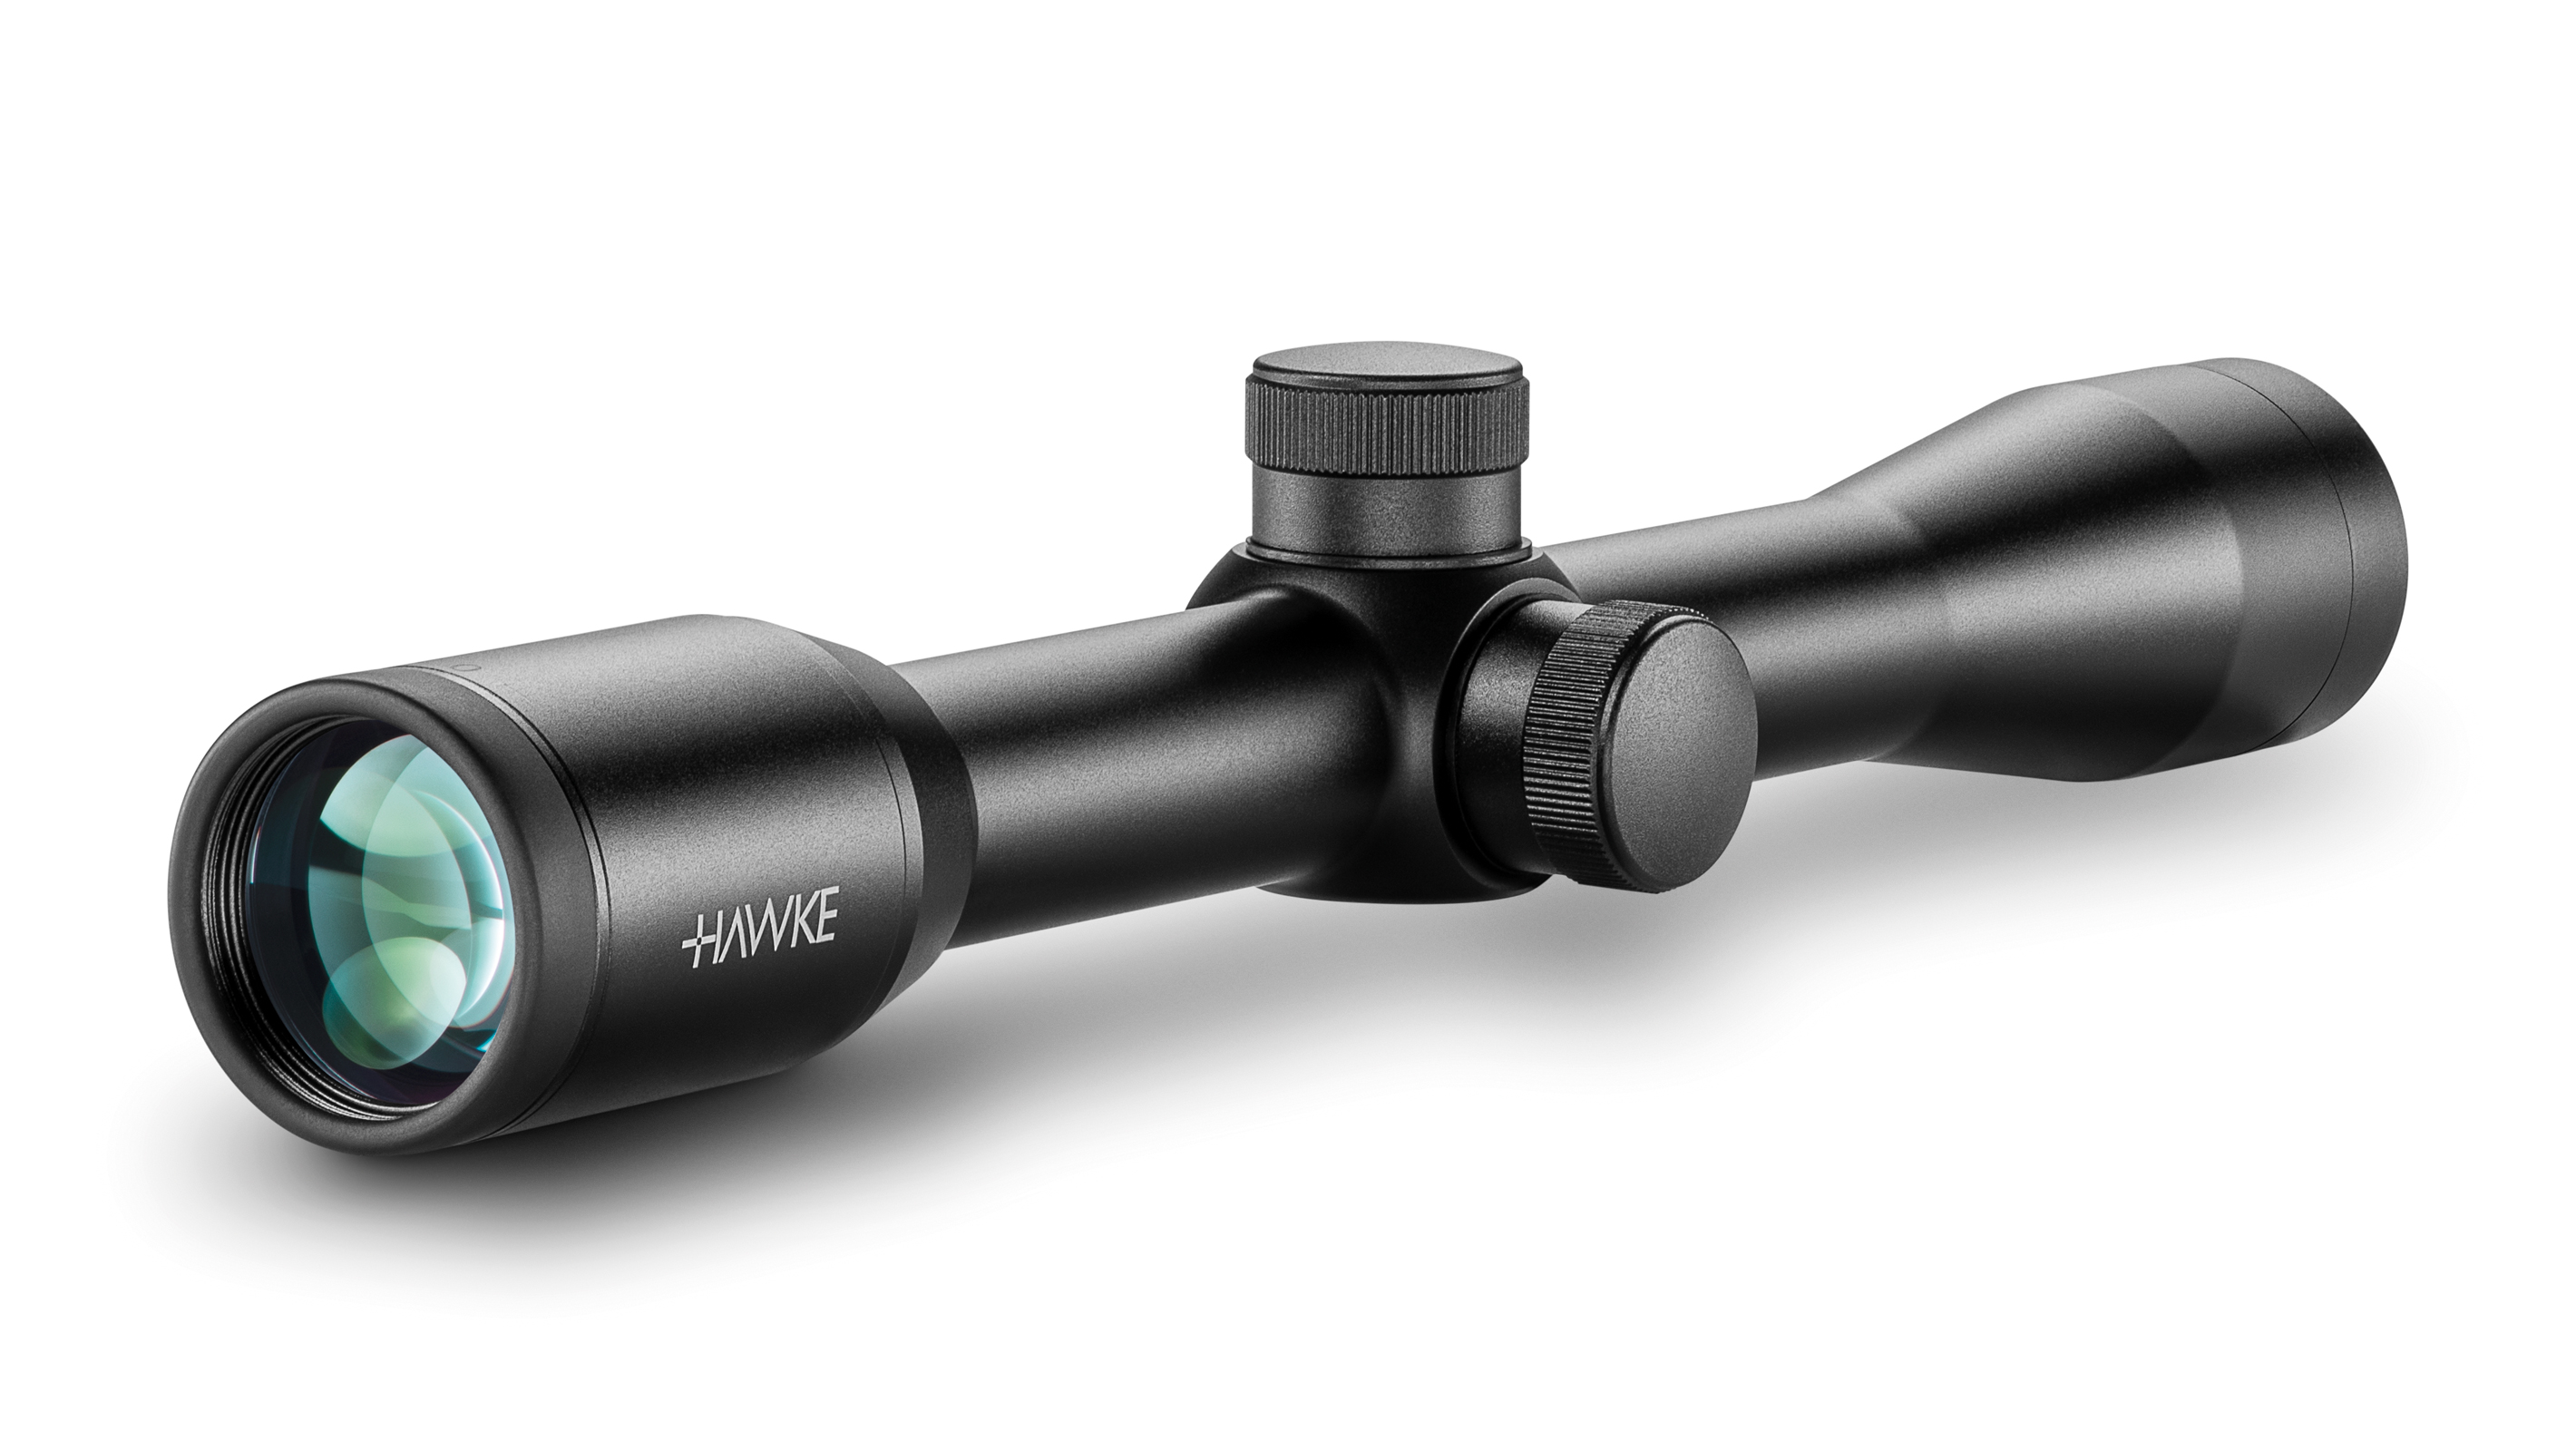 Ocular End View Of The Hawke Vantage 4x32 Mil Dot Rifle Scope